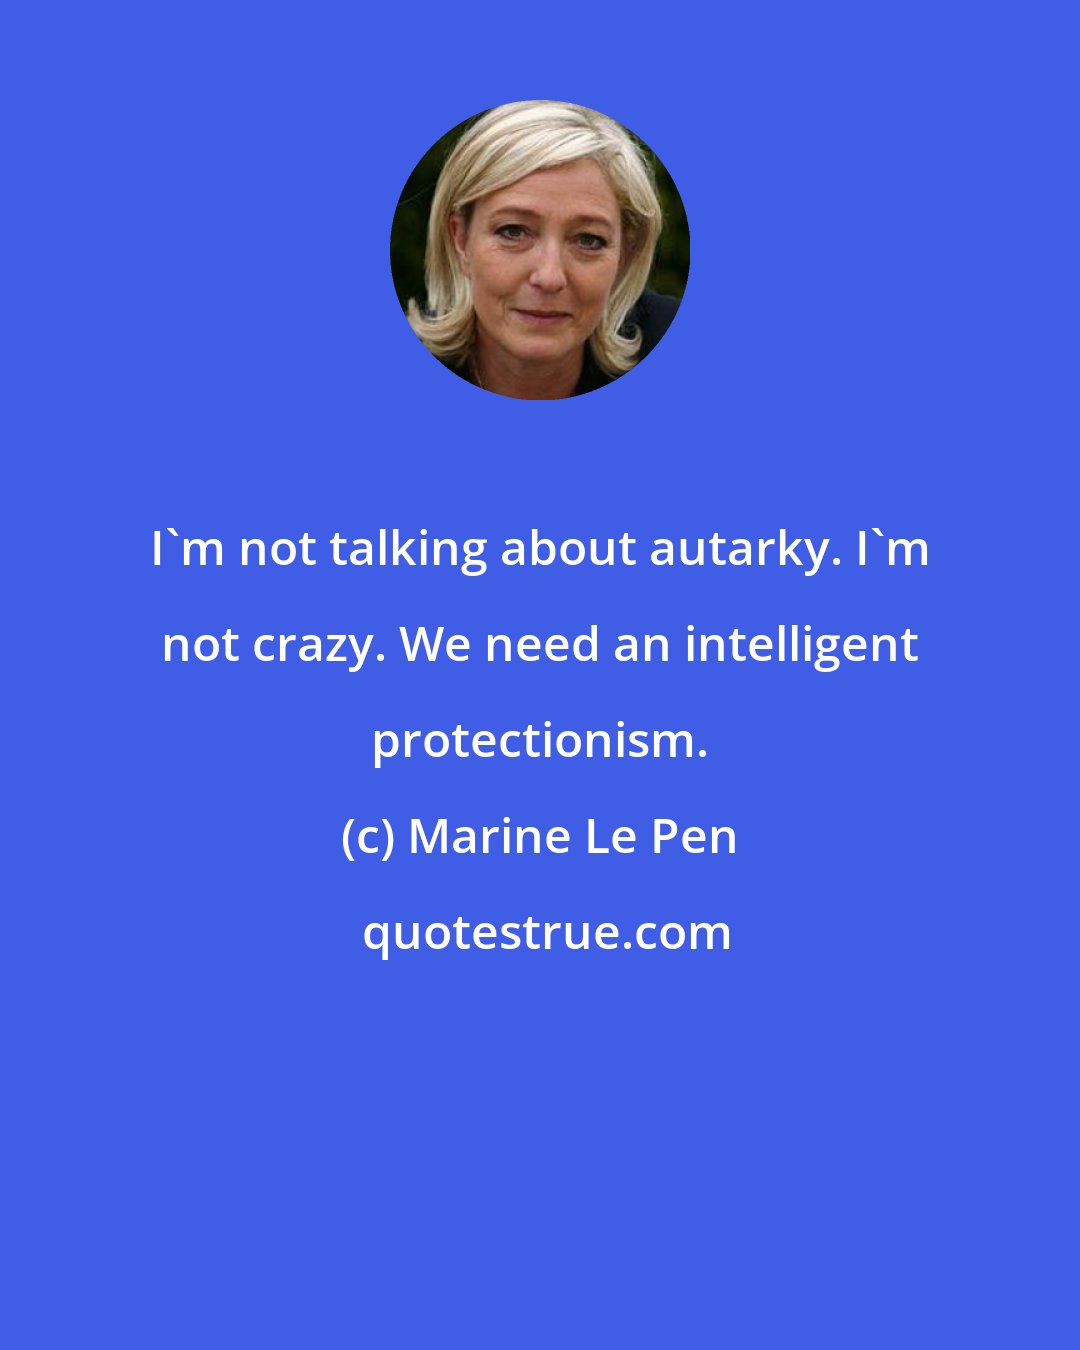 Marine Le Pen: I'm not talking about autarky. I'm not crazy. We need an intelligent protectionism.